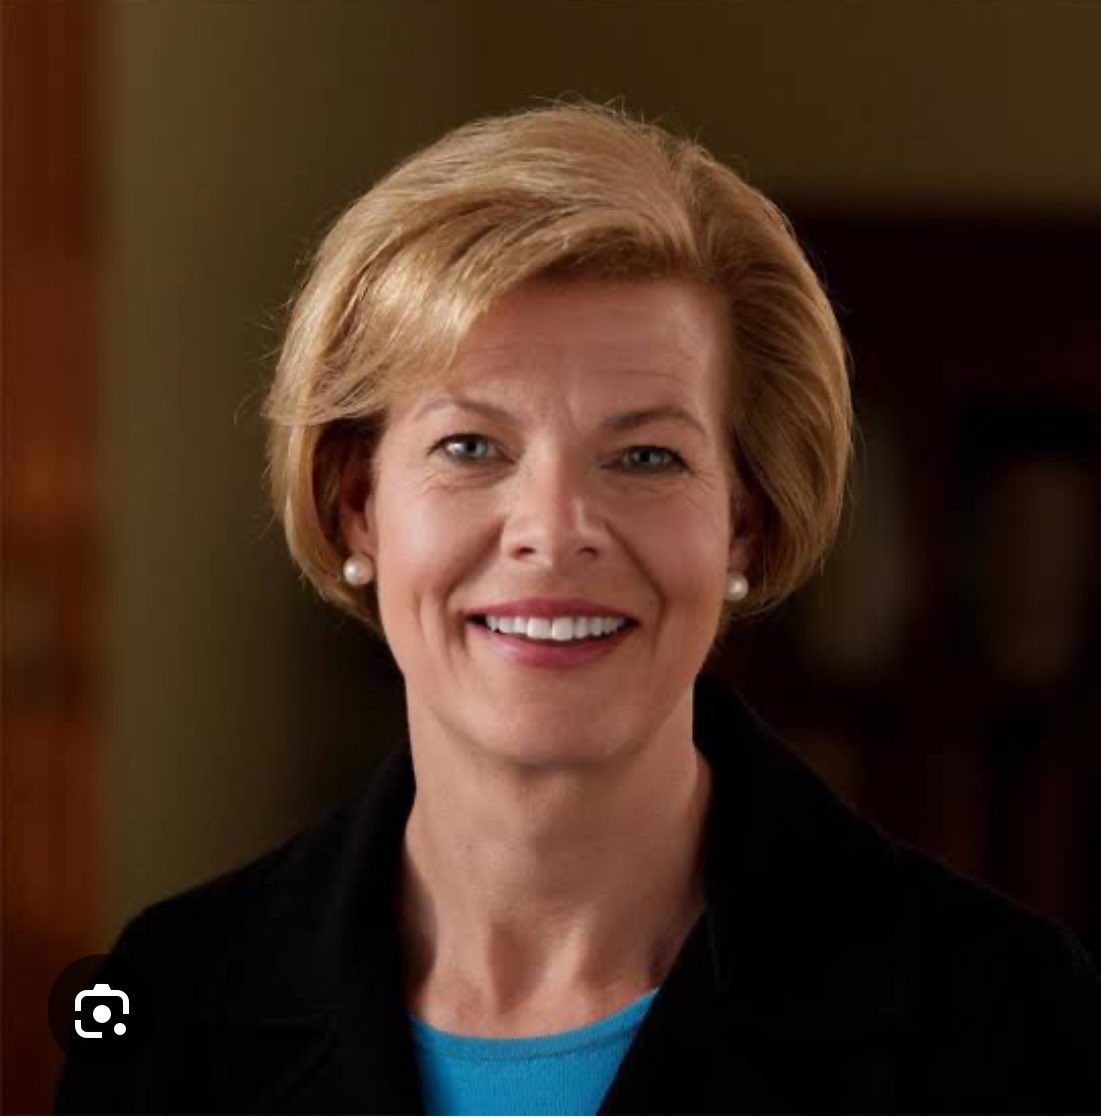 The Democrat from Madison is just barely a millionaire, and in the middle of U.S. Senate in terms of wealth. She made personal voluntary choices regarding her wealth. Vote for @TammyBaldwin for Senator! #ProudBlue #Allied4Dems